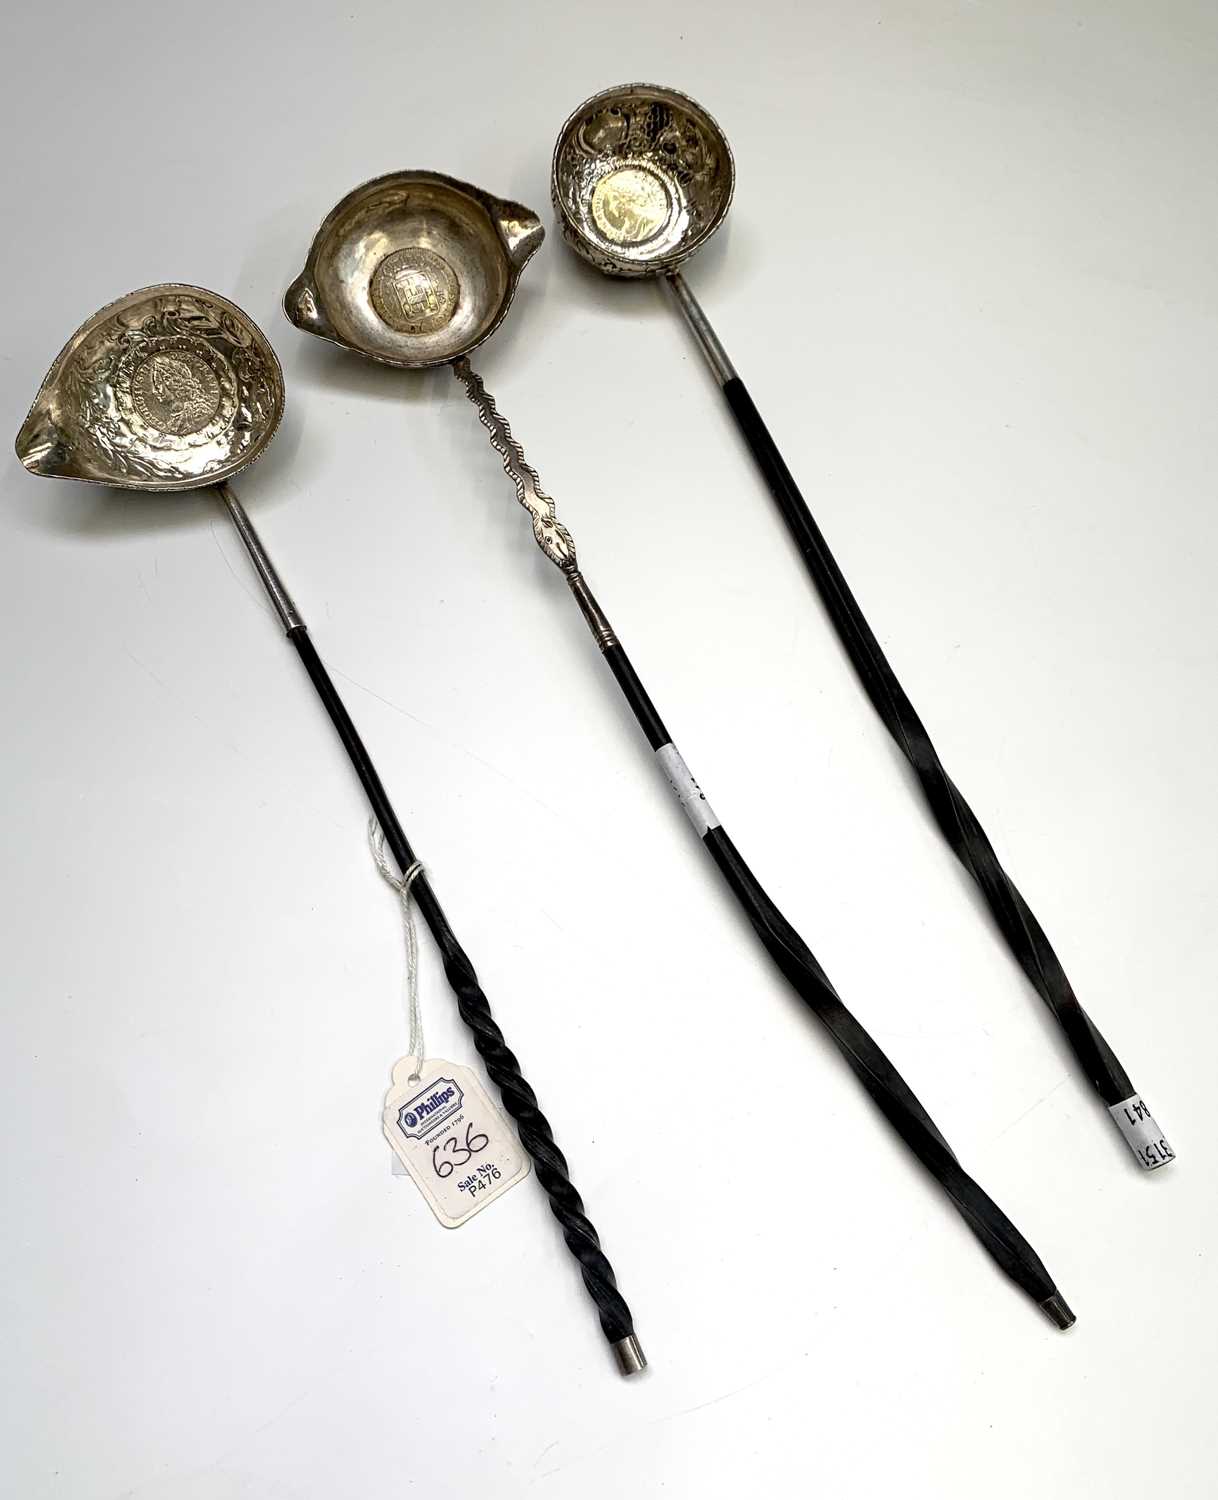 Three coin set 18th century punch ladles, with spiral whale bone handles, one set a George II